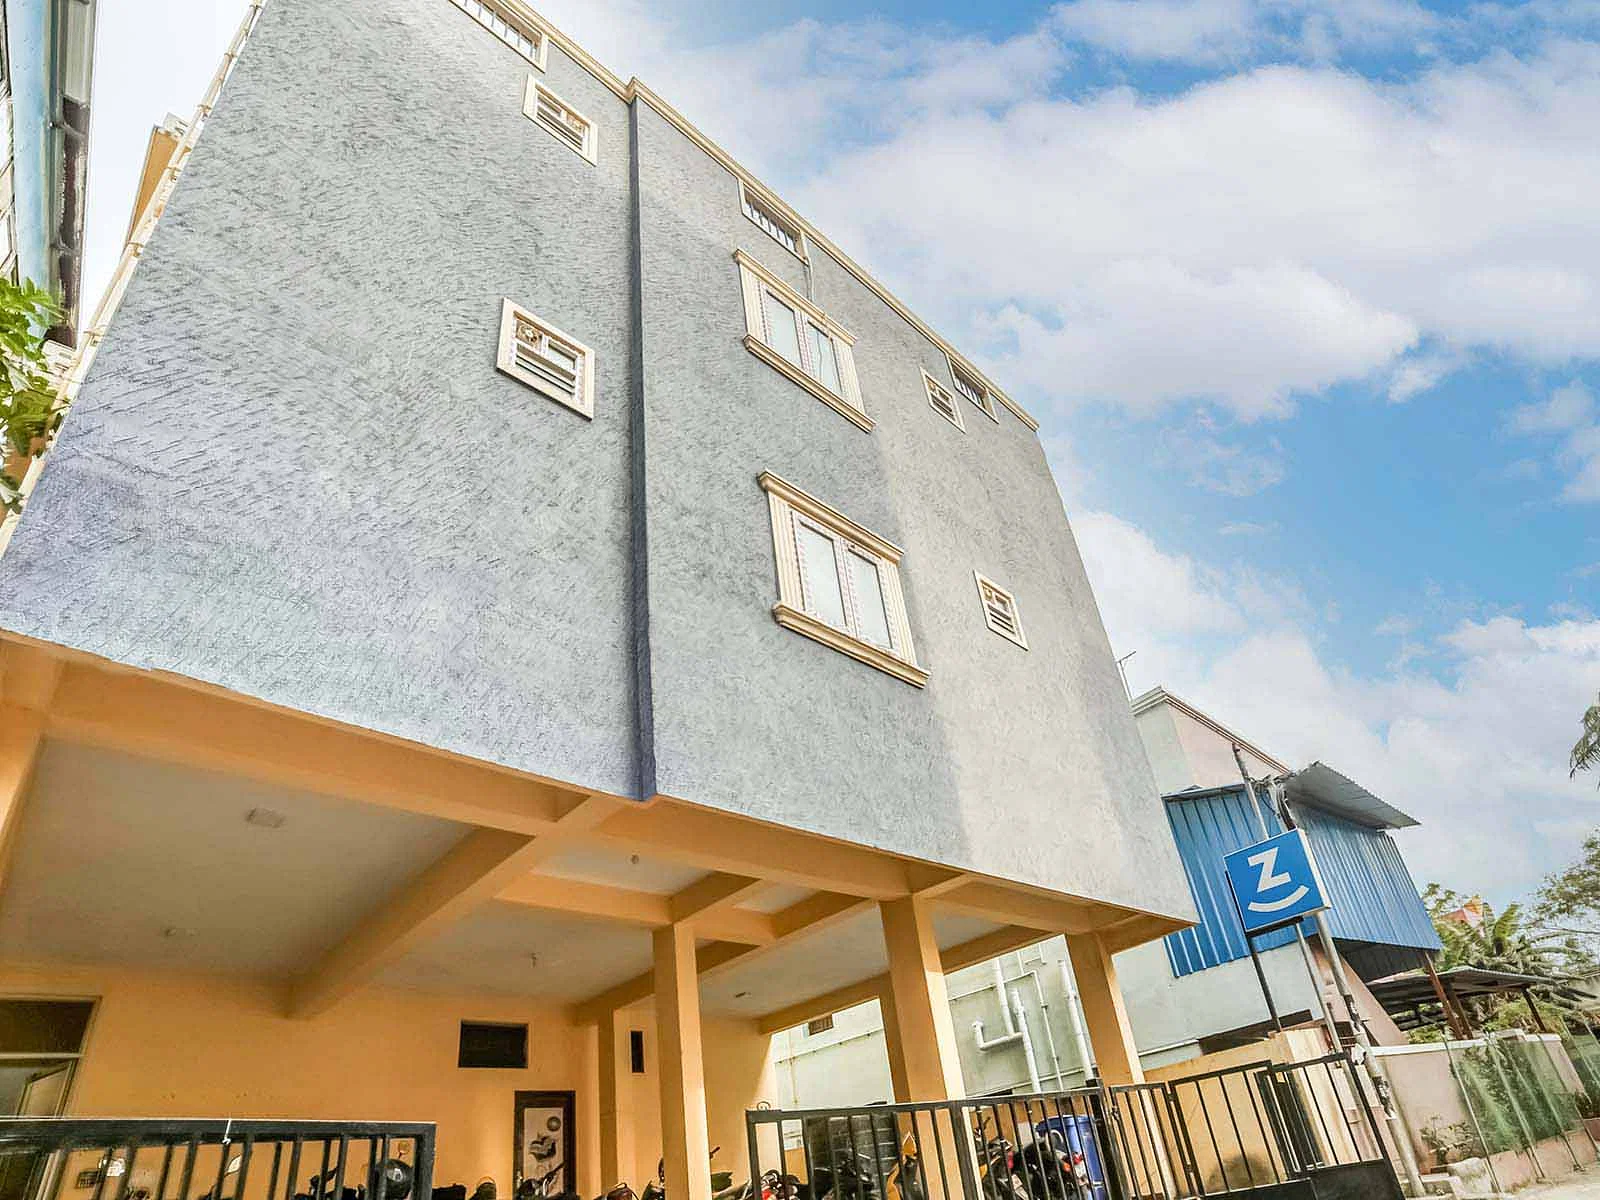 safe and affordable hostels for gents students with 24/7 security and CCTV surveillance-Zolo Westeros